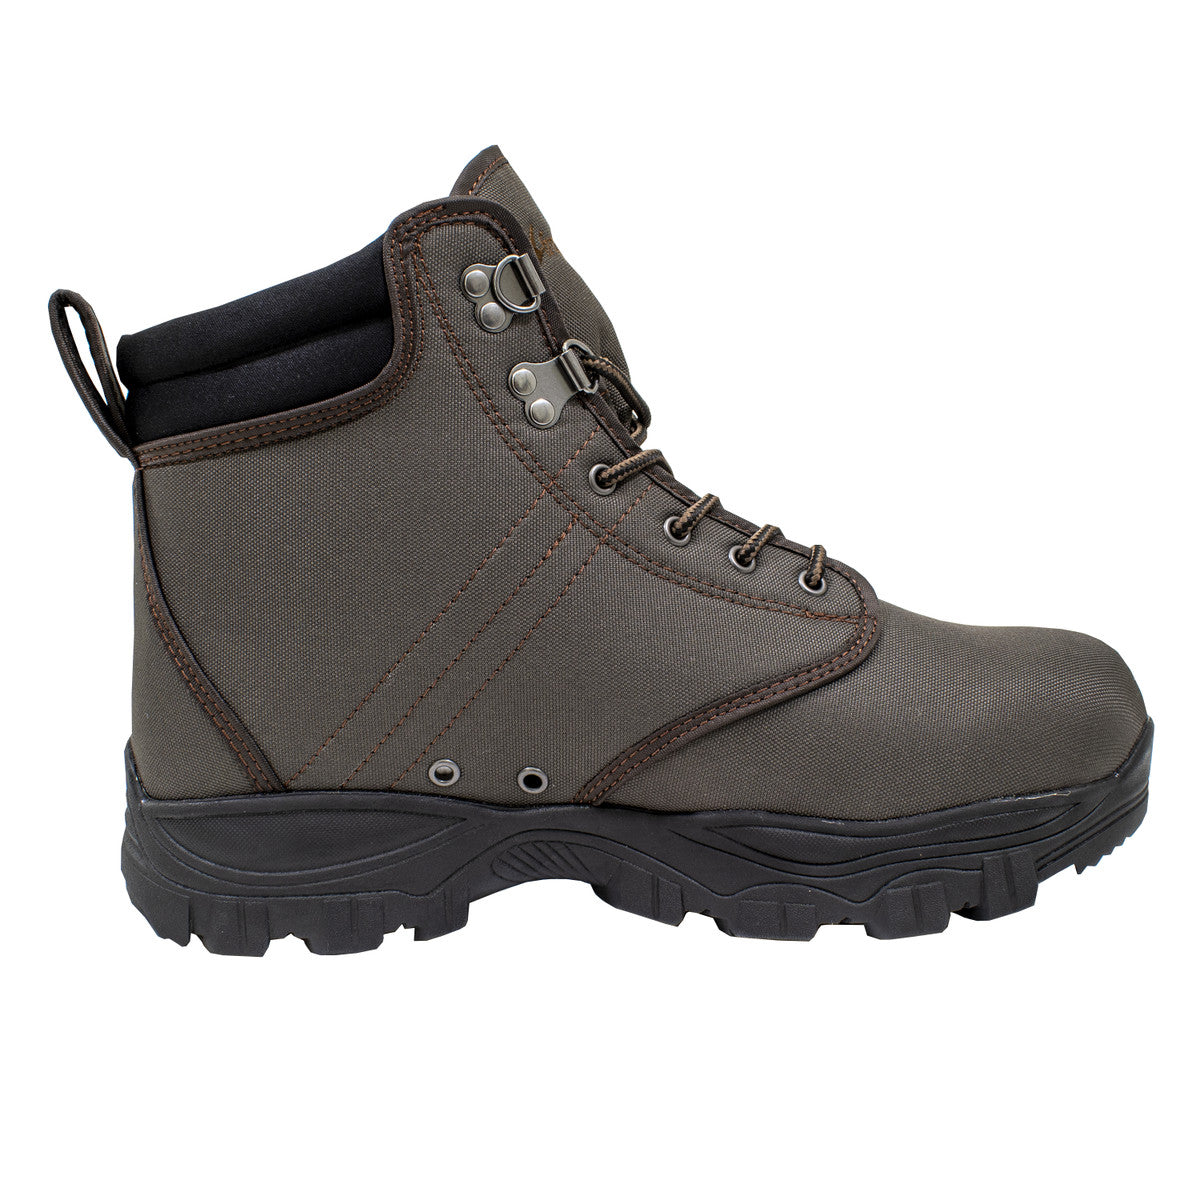 FROGG TOGGS Men's Rana Elite Fishing Wading Boots in Felt or